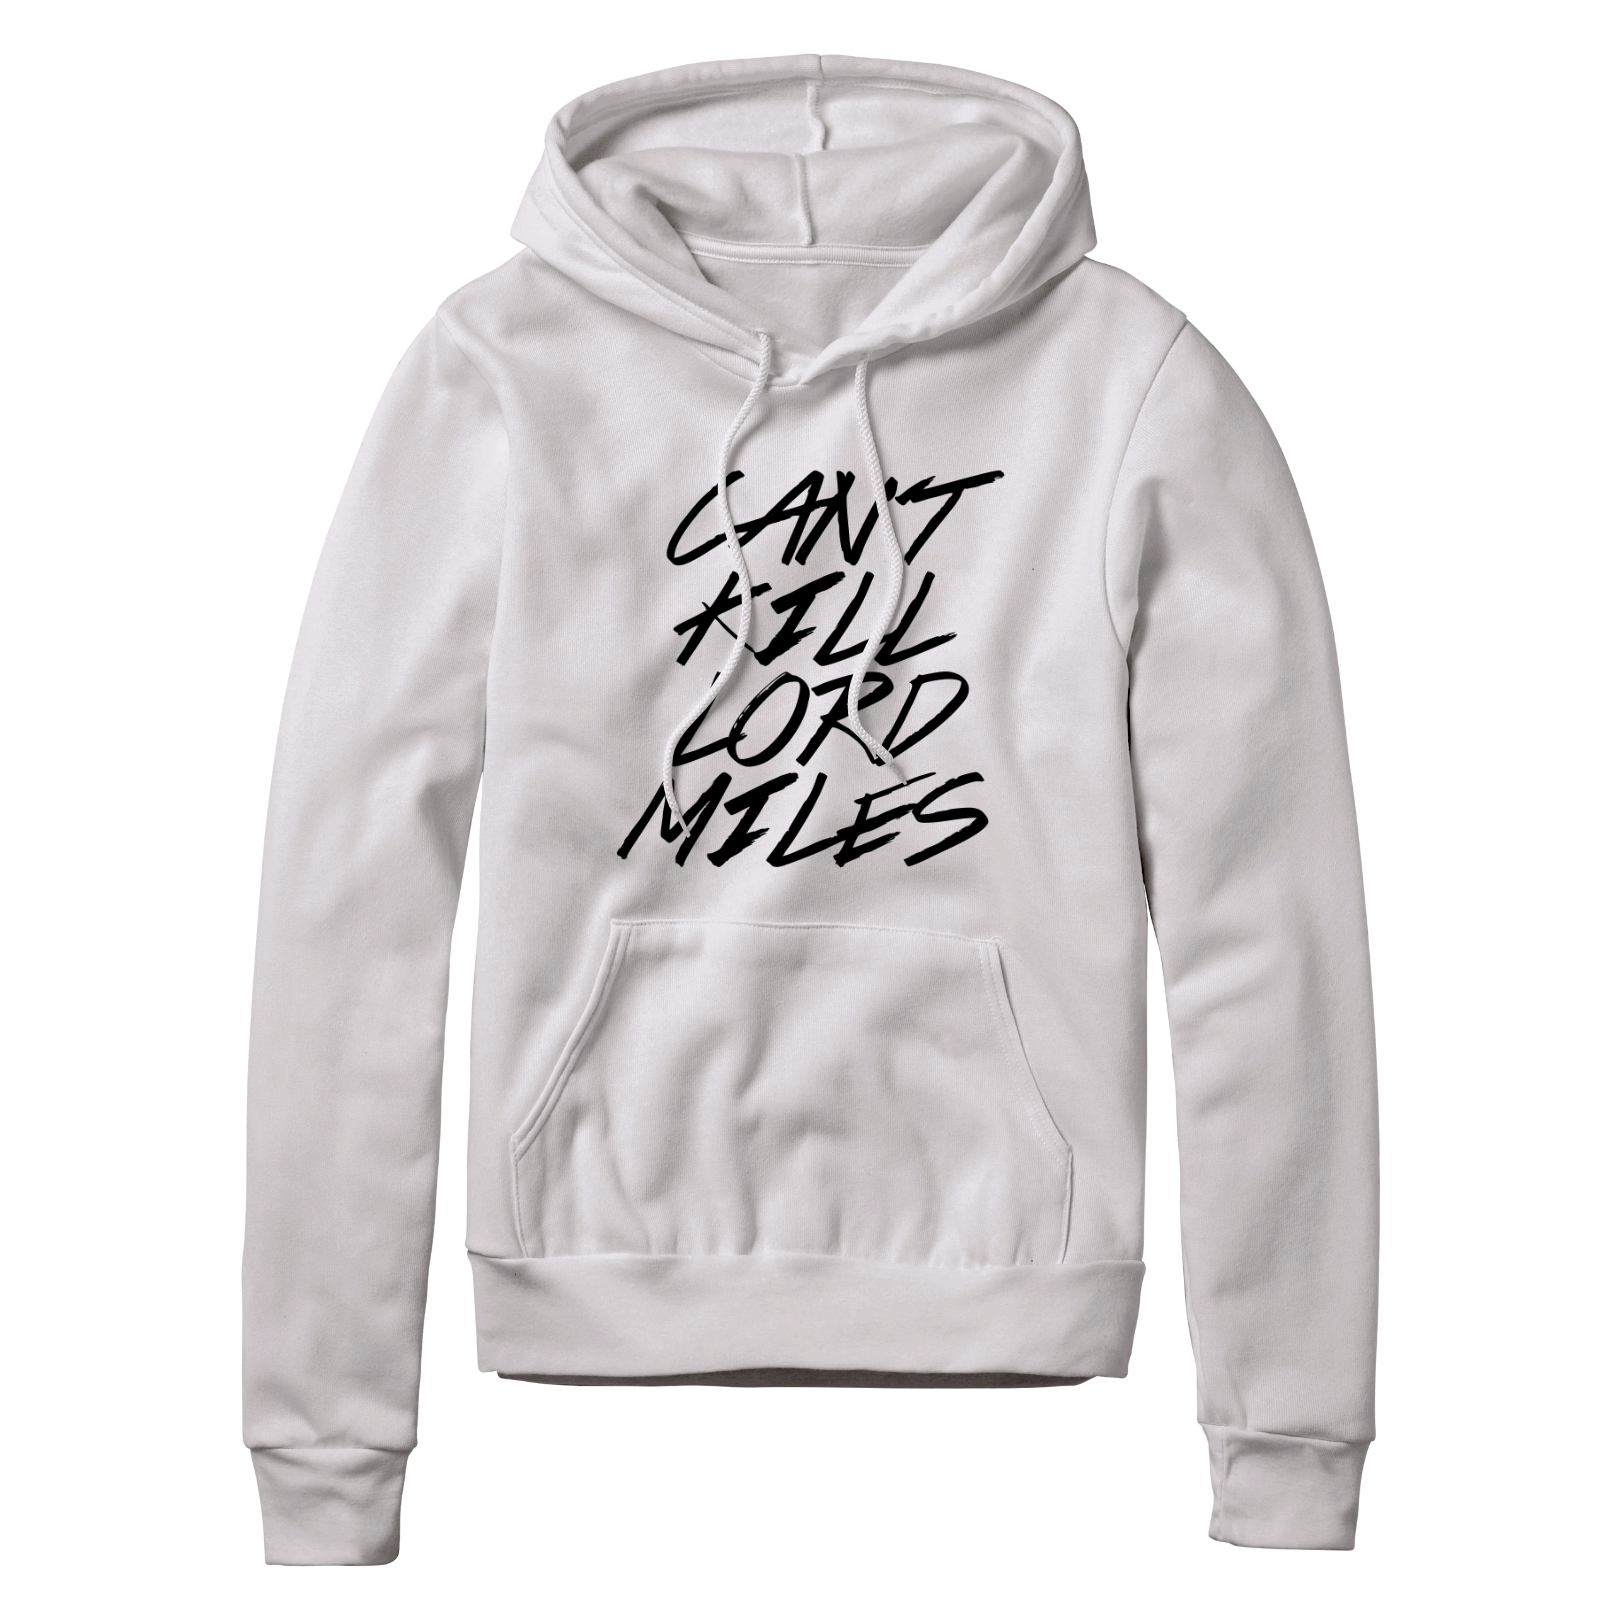 Cant Kill Lord Miles (White) Tanktop-2